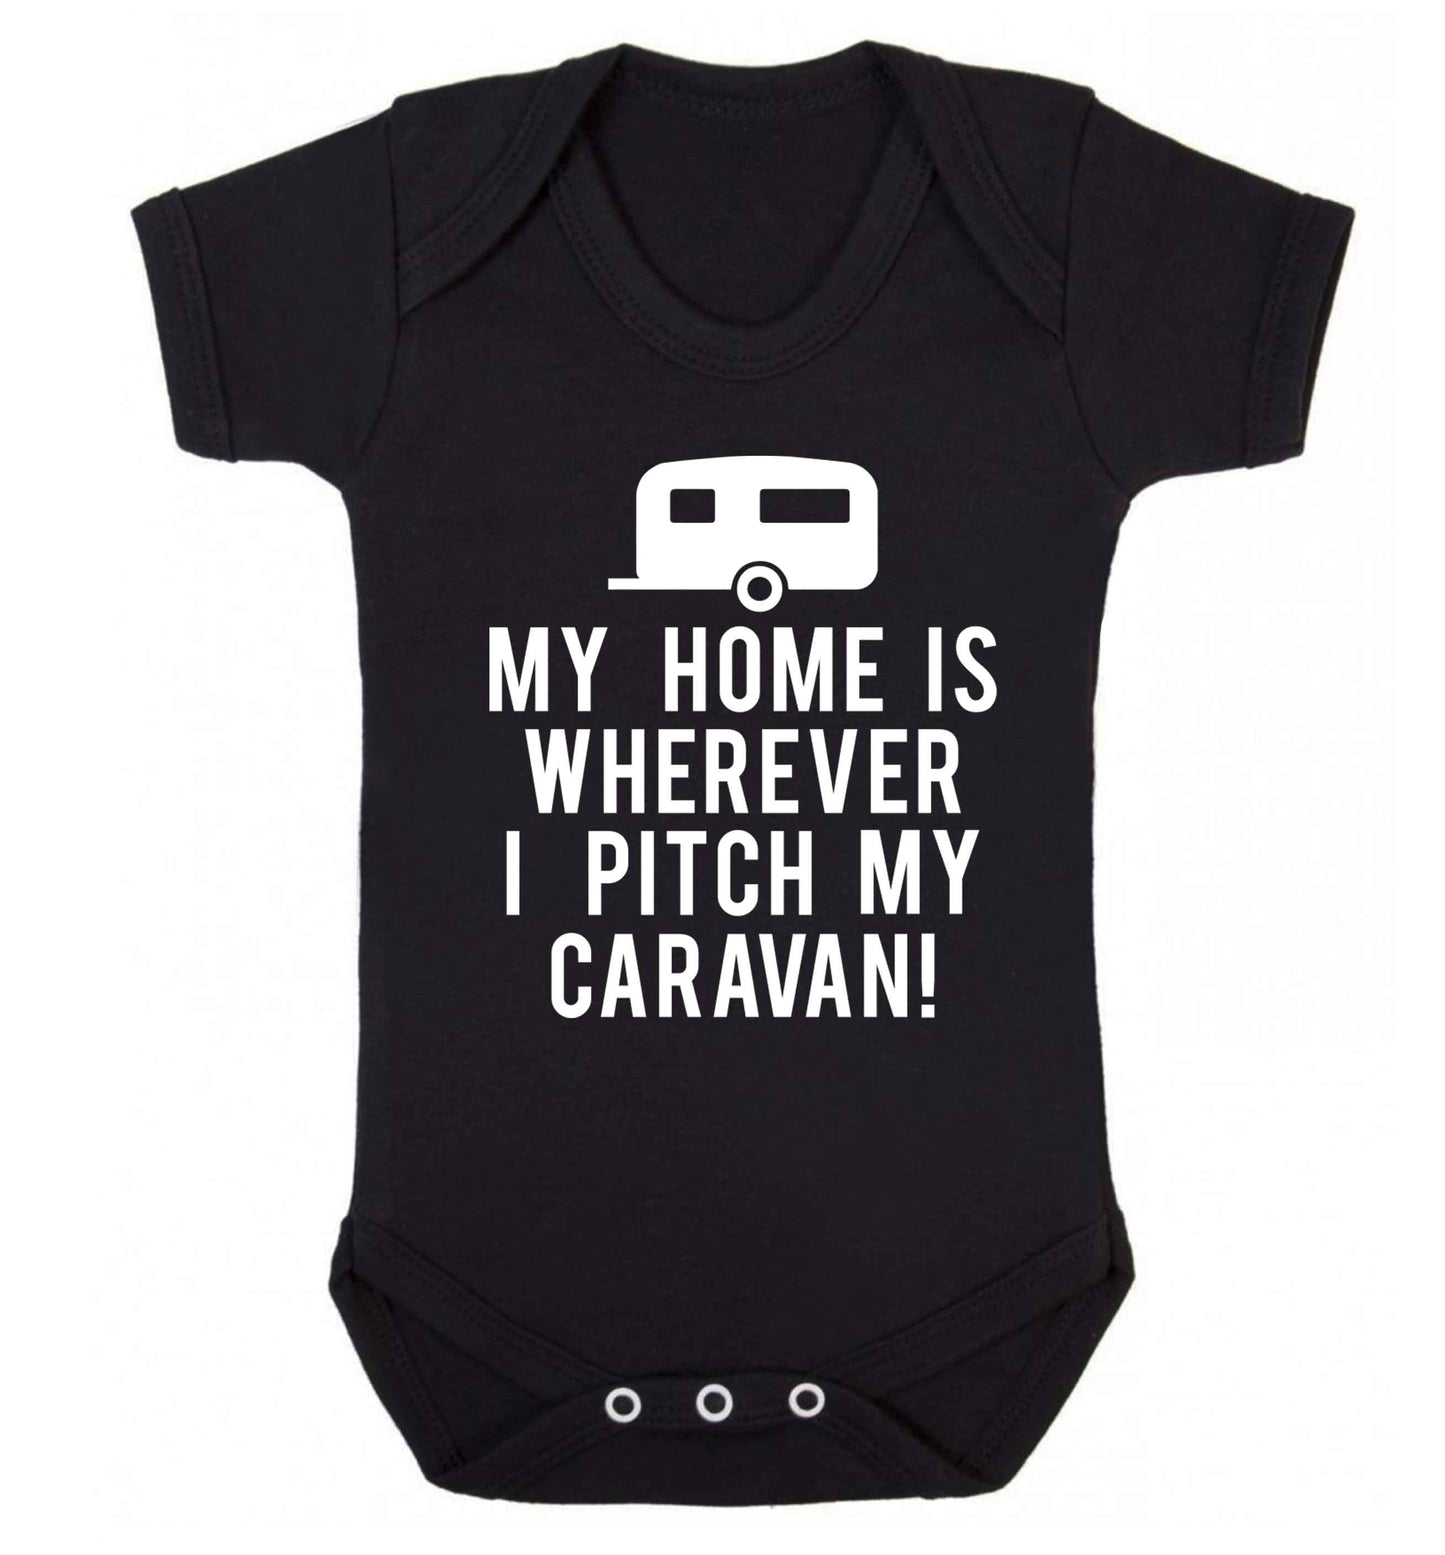 My home is wherever I pitch my caravan Baby Vest black 18-24 months